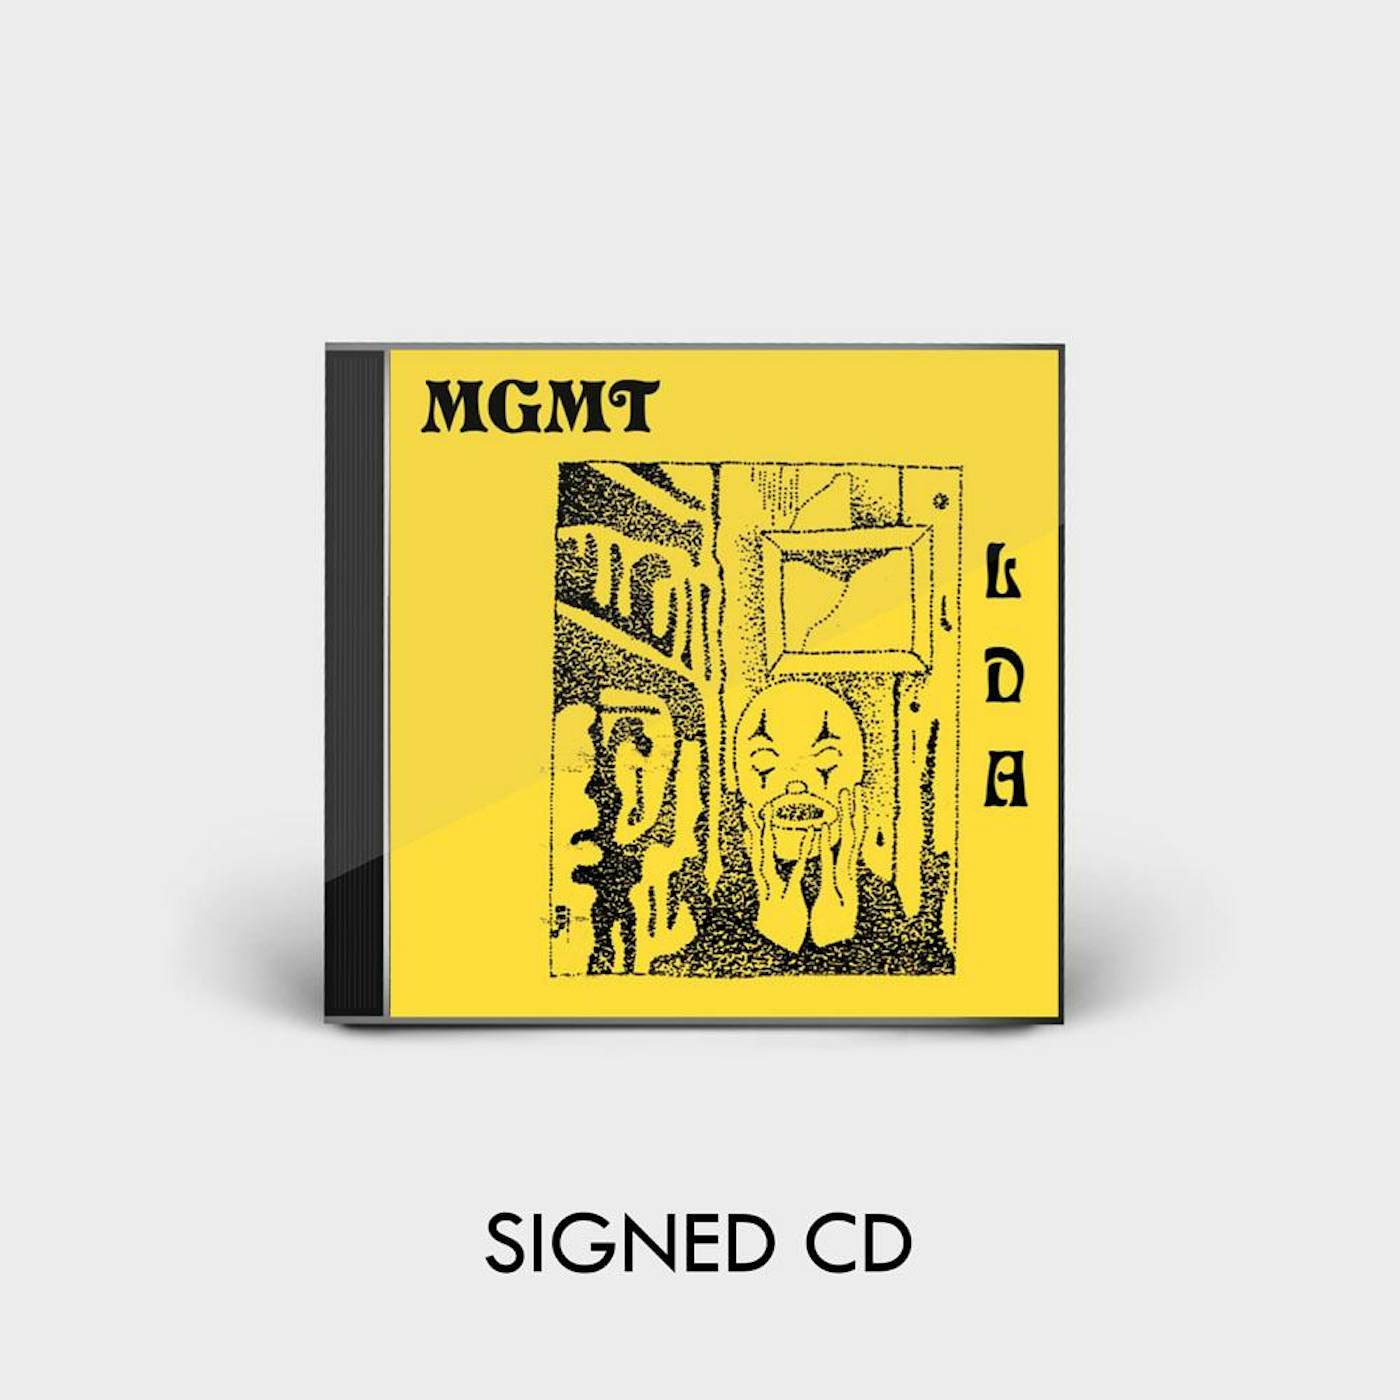 MGMT LITTLE DARK AGE - SIGNED CD